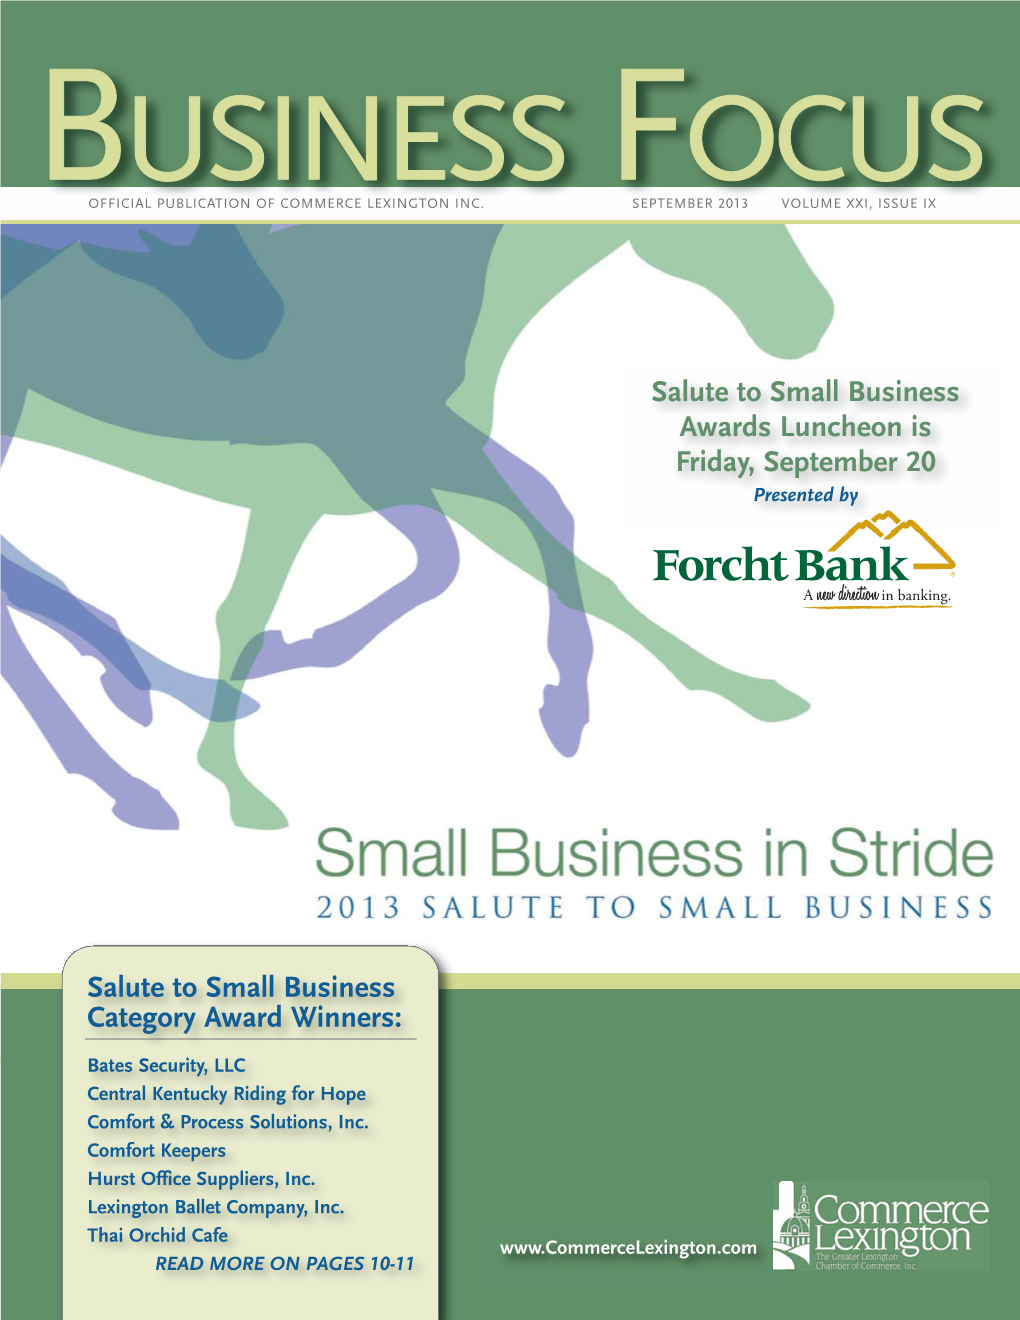 Salute to Small Business Category Award Winners: Salute to Small Business Awards Luncheon Is Friday, September 20